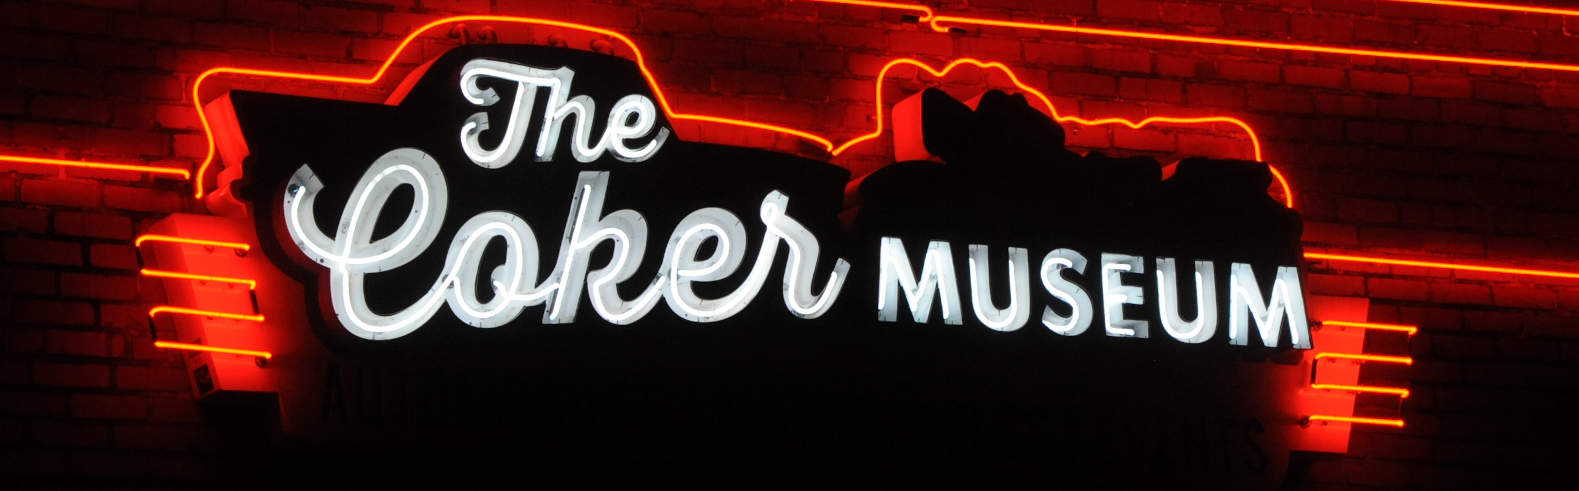 Coker Tire Museum Neon Sign in Chattanooga, TN